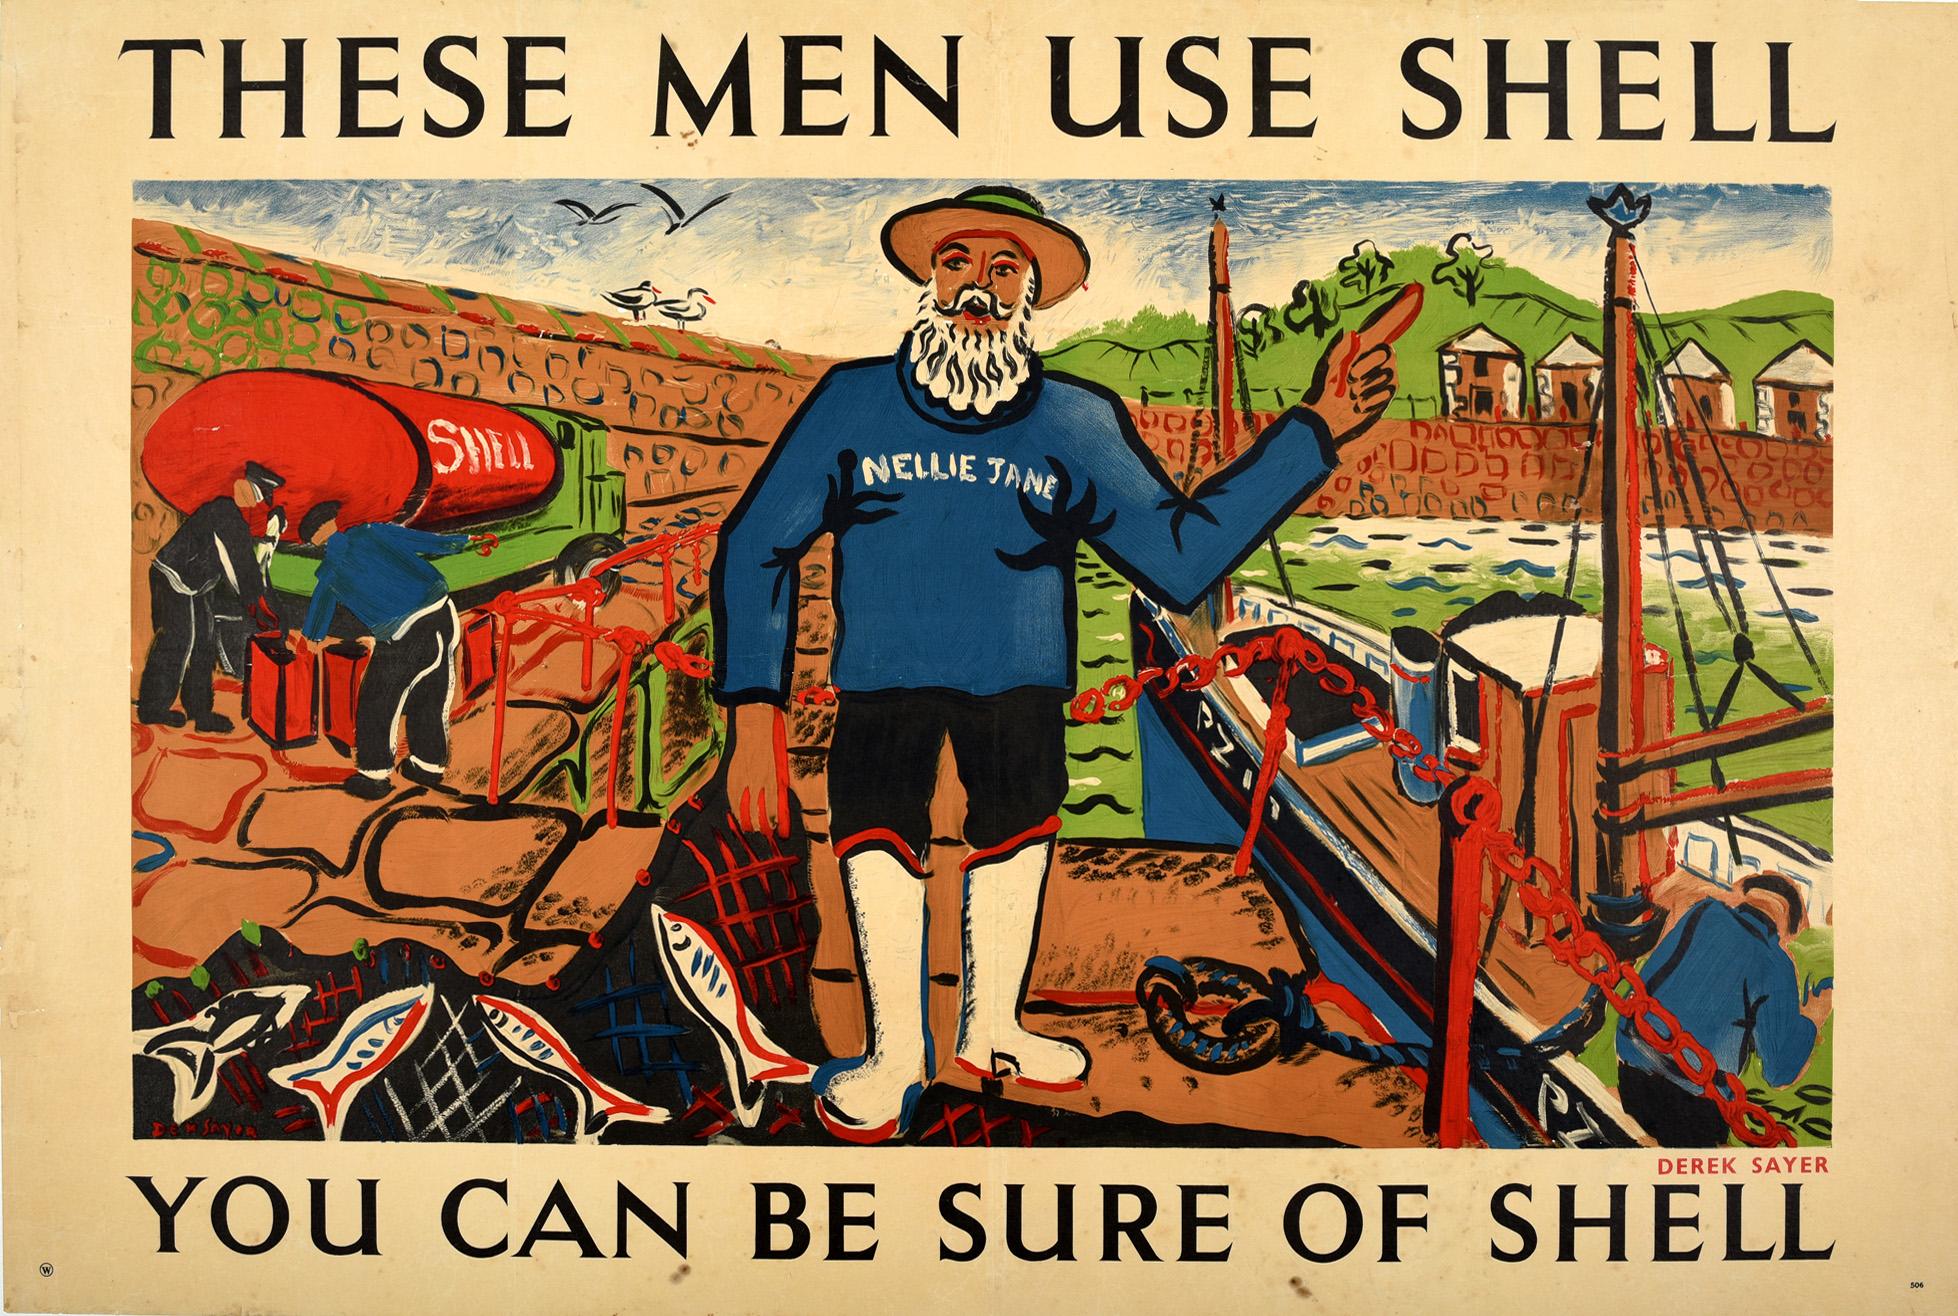 Derek Sayer Print - Original Vintage Poster These Men Use Shell You Can Be Sure of Shell Fisherman